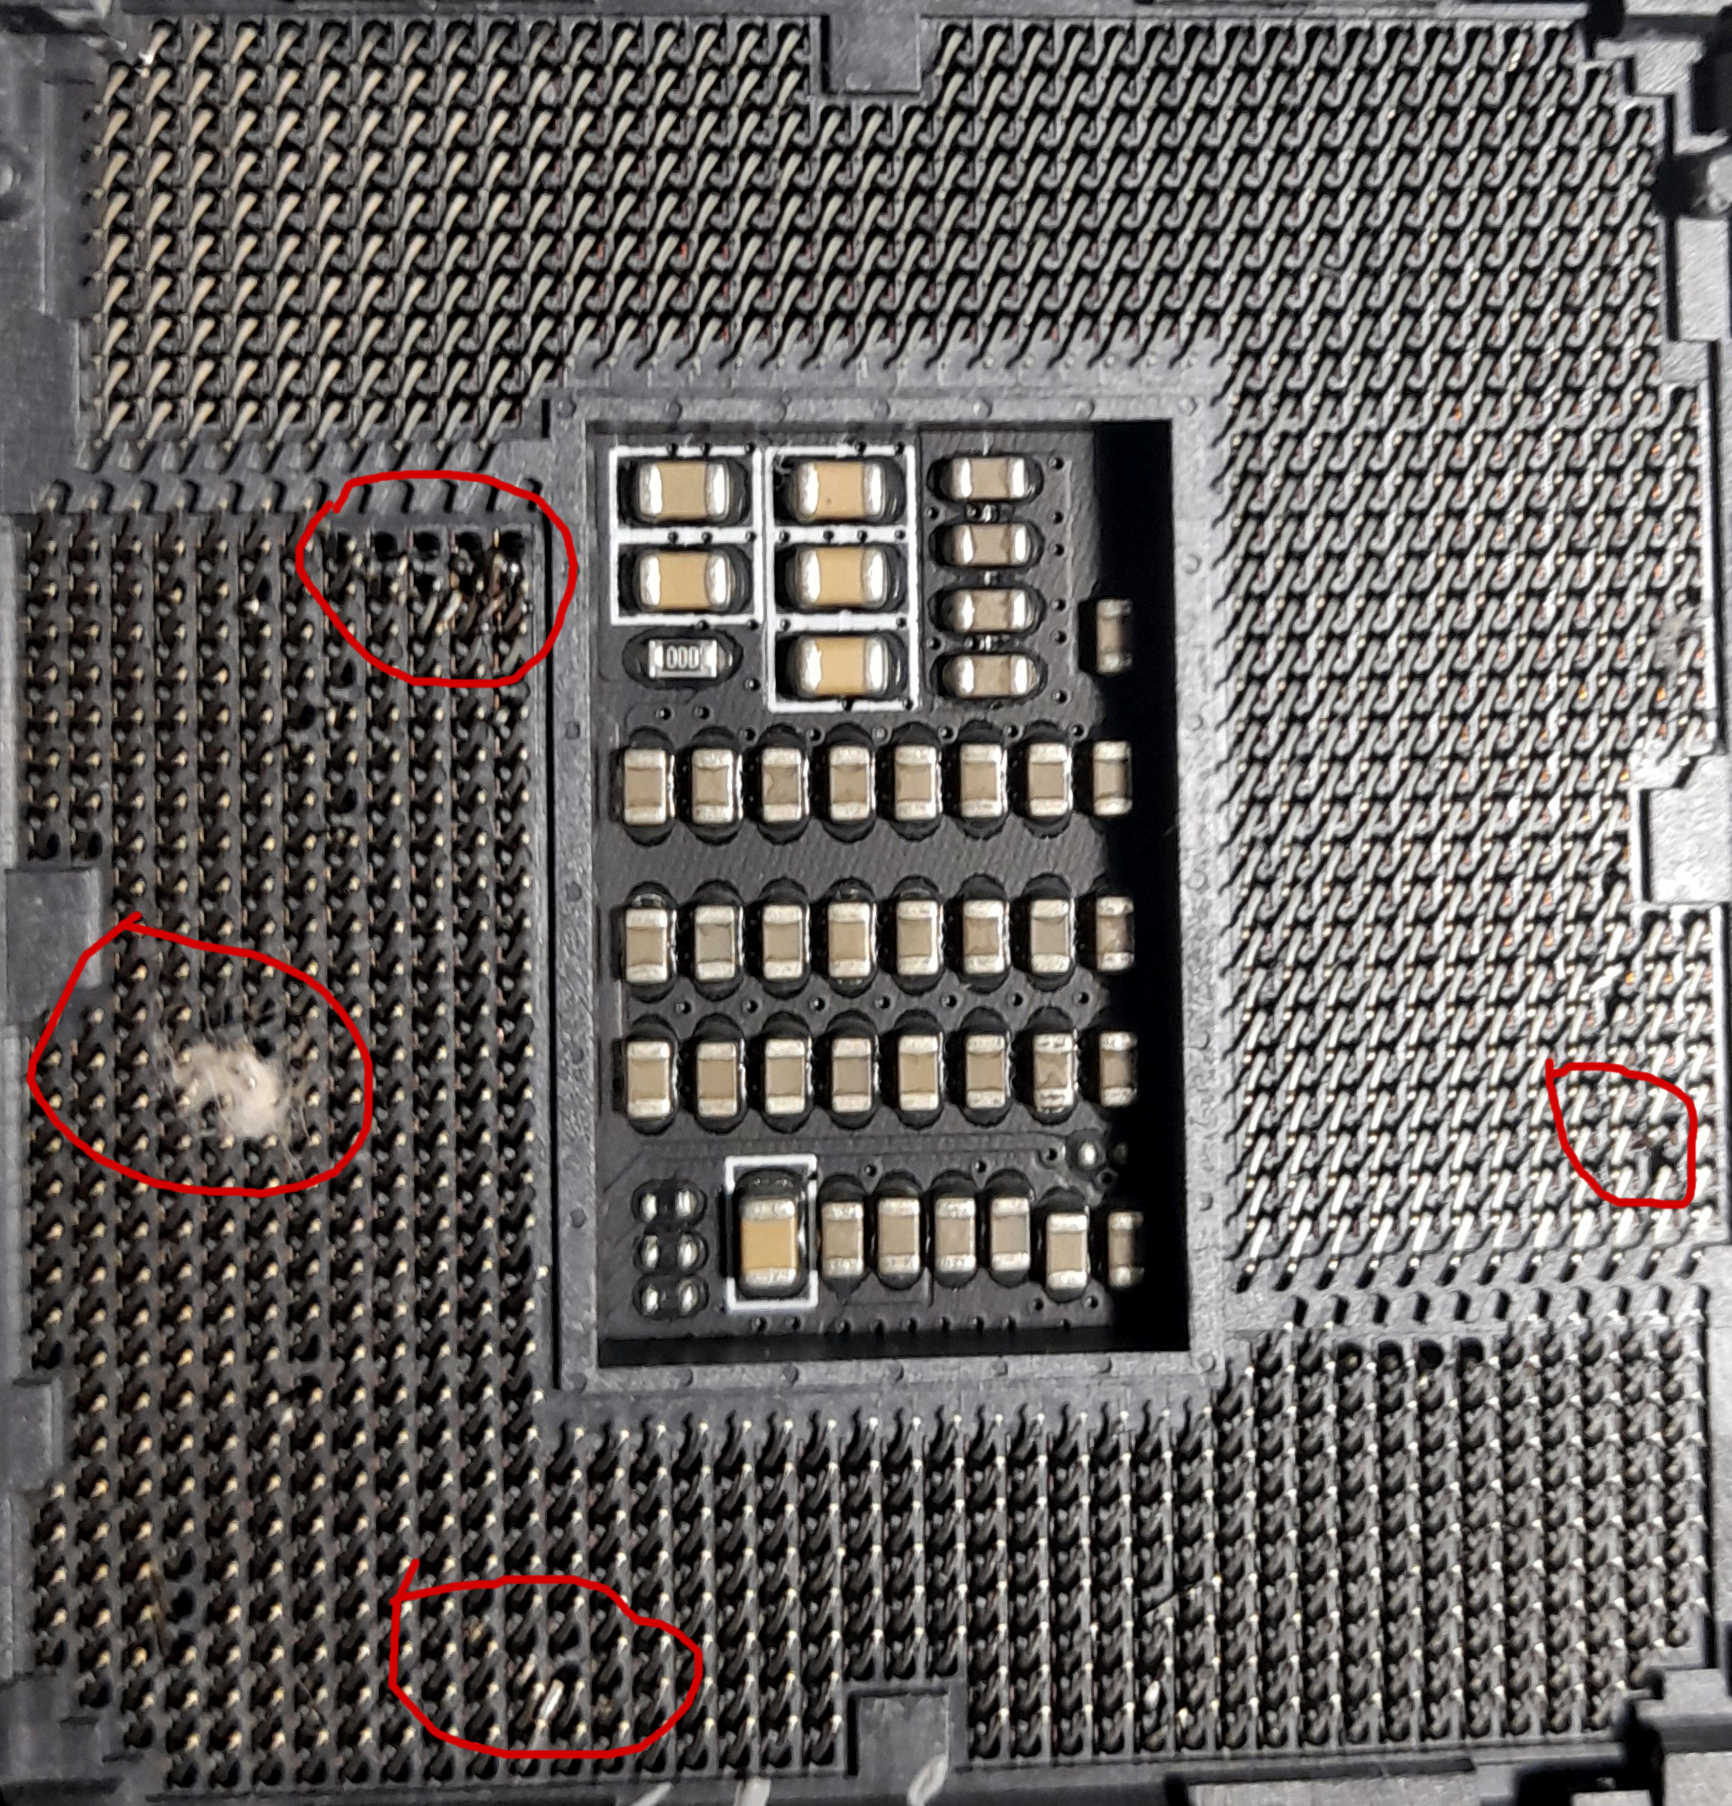 lga 1700 socket has thermal paste and possibly bent pins. is it